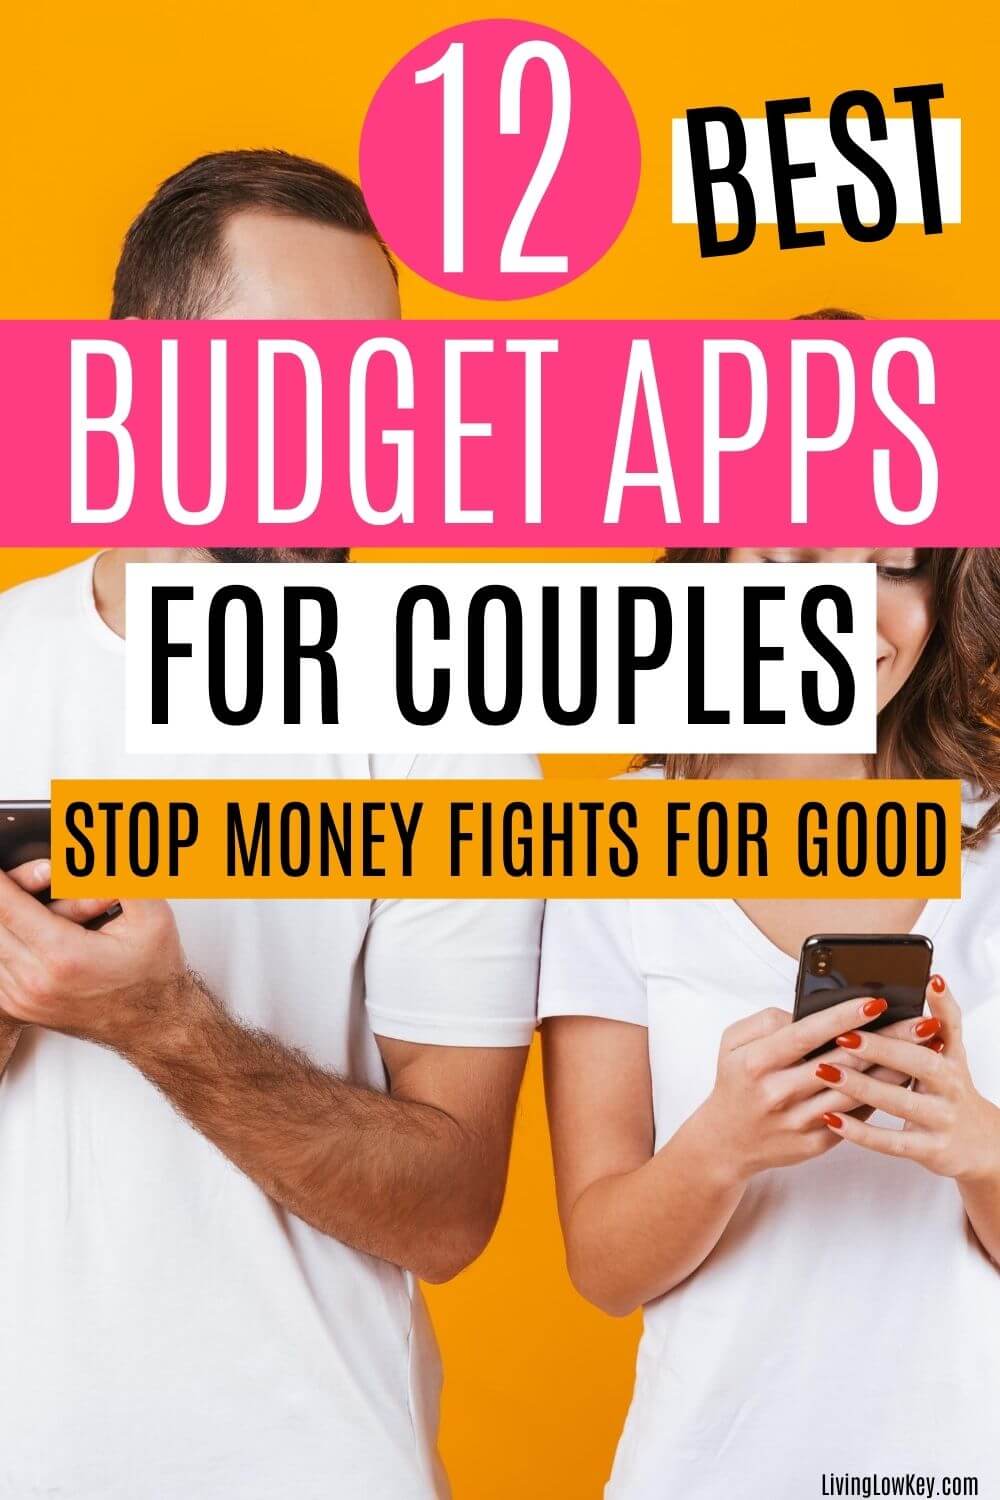 13 Best Budget Apps for Couples on a Budget